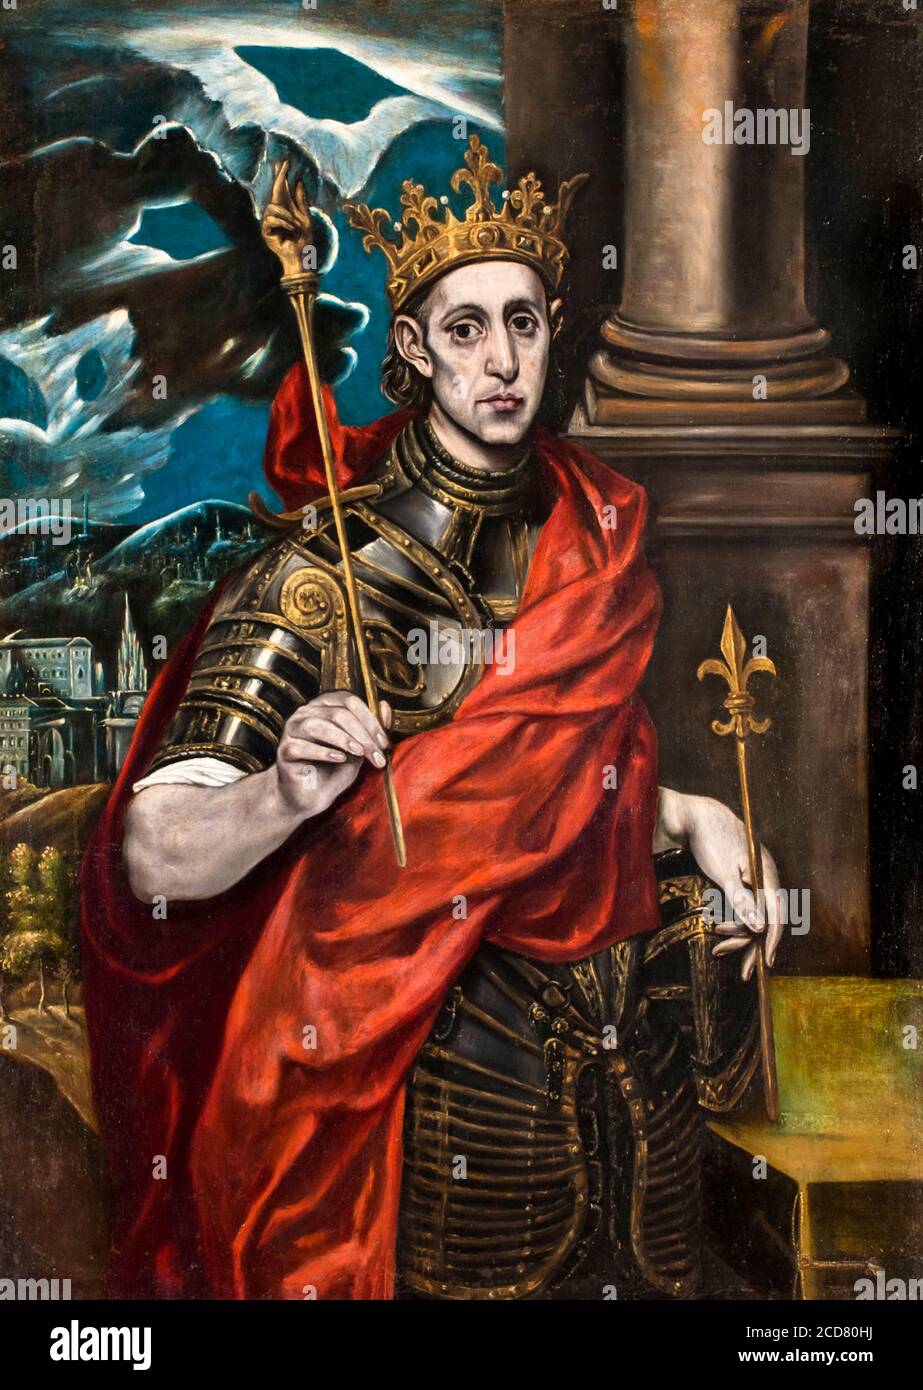 St Louis, King of France (Louis IX, 1214-1270), painting by Workshop of El Greco, 1615-1630 Stock Photo